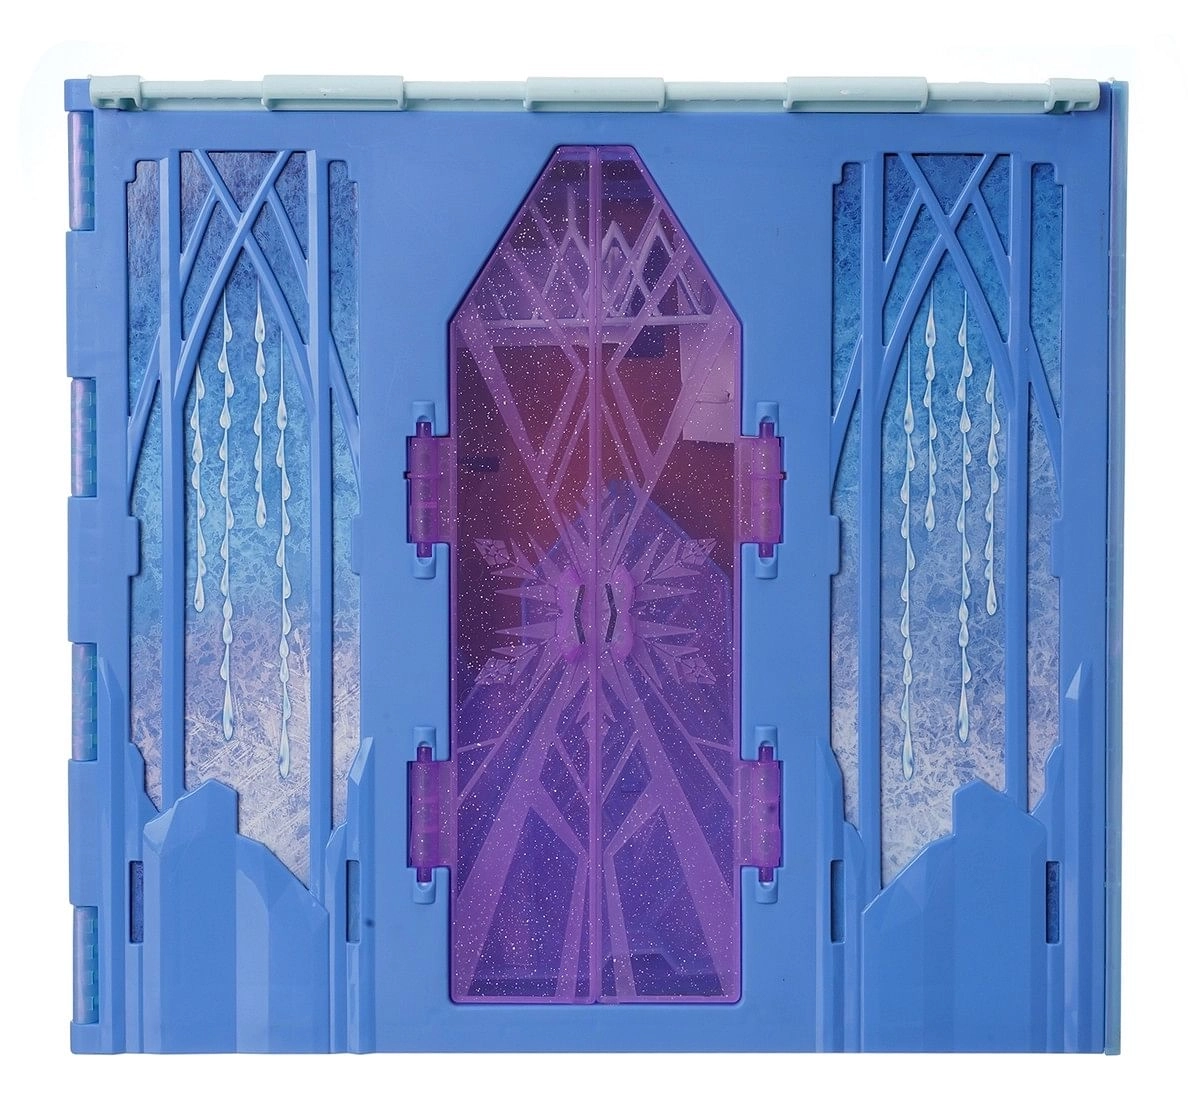 Frozen Fold and Go Ice Palace Castle Set for kids 3Y+, Multicolour